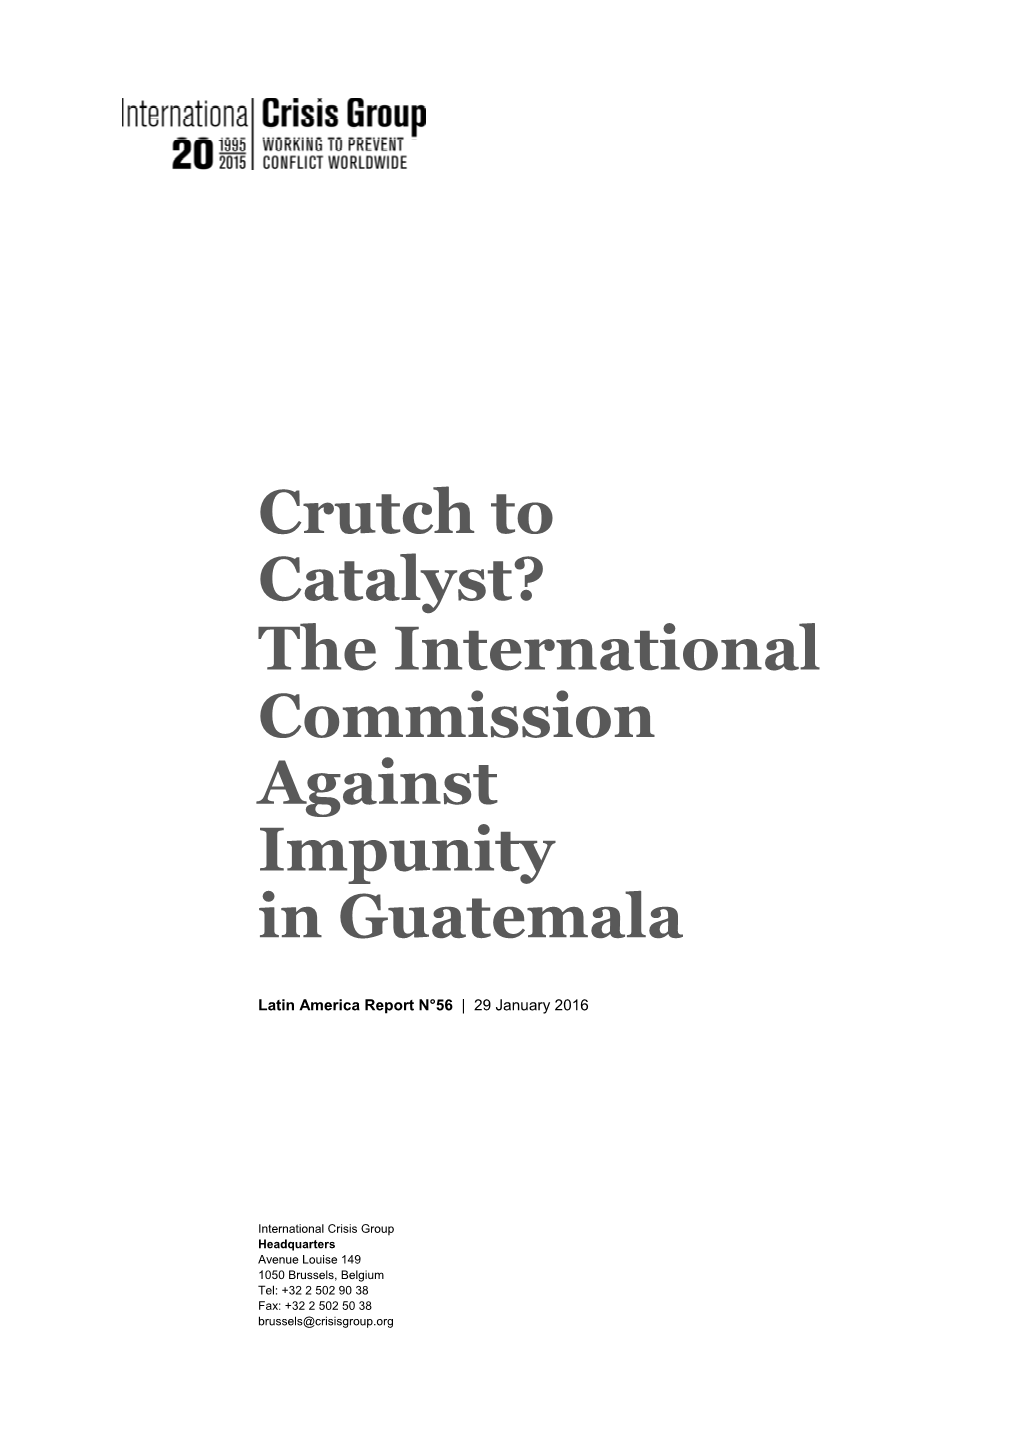 Crutch to Catalyst? the International Commission Against Impunity in Guatemala